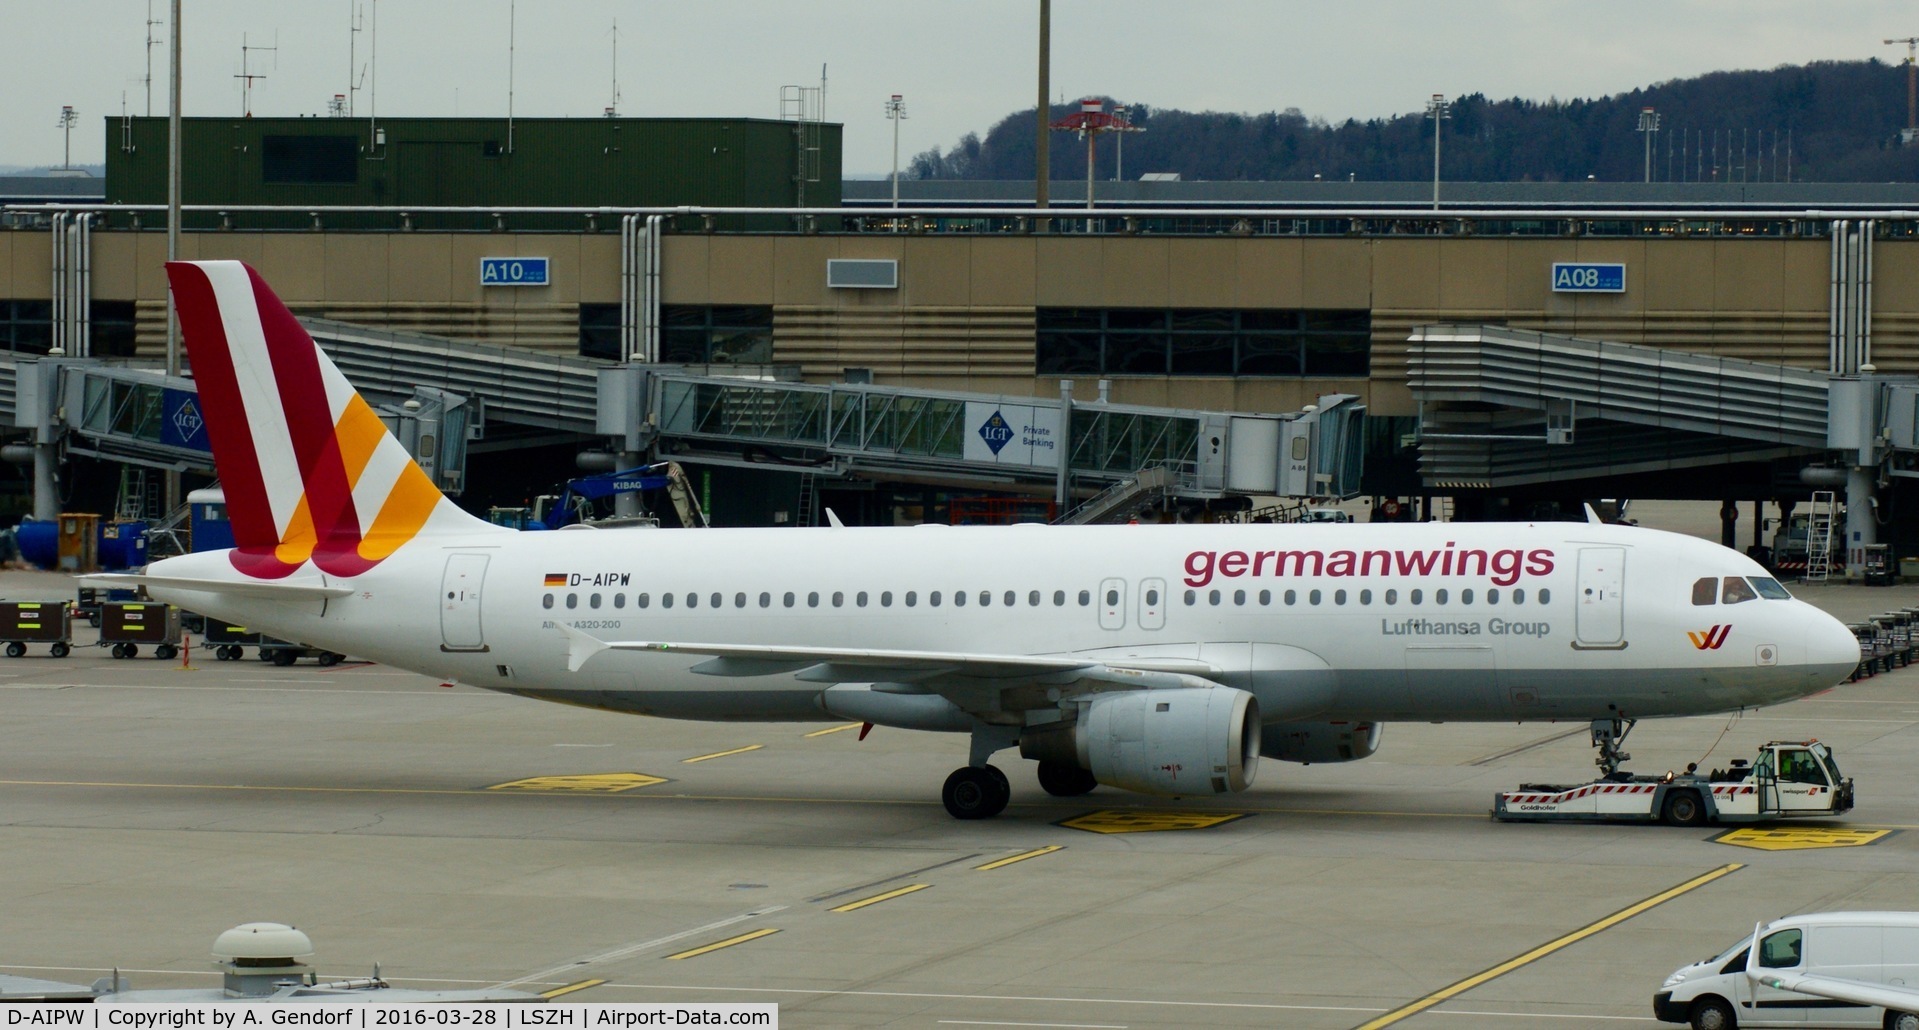 D-AIPW, 1990 Airbus A320-211 C/N 137, Germanwings, is here pushed back at Zürich-Kloten(LSZH)